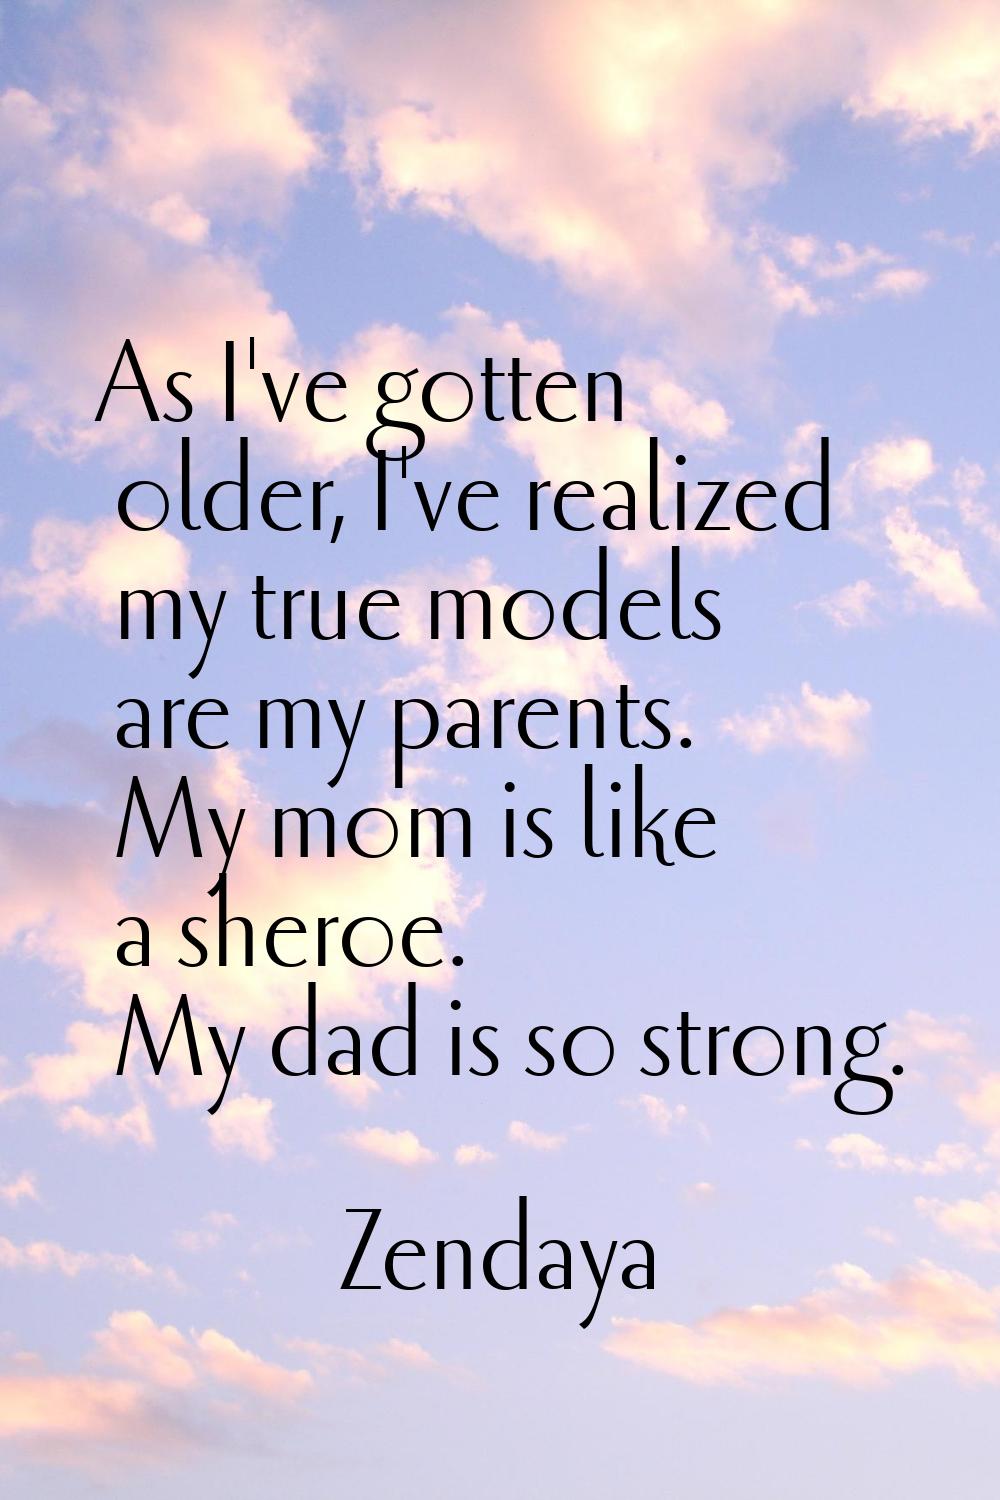 As I've gotten older, I've realized my true models are my parents. My mom is like a sheroe. My dad 